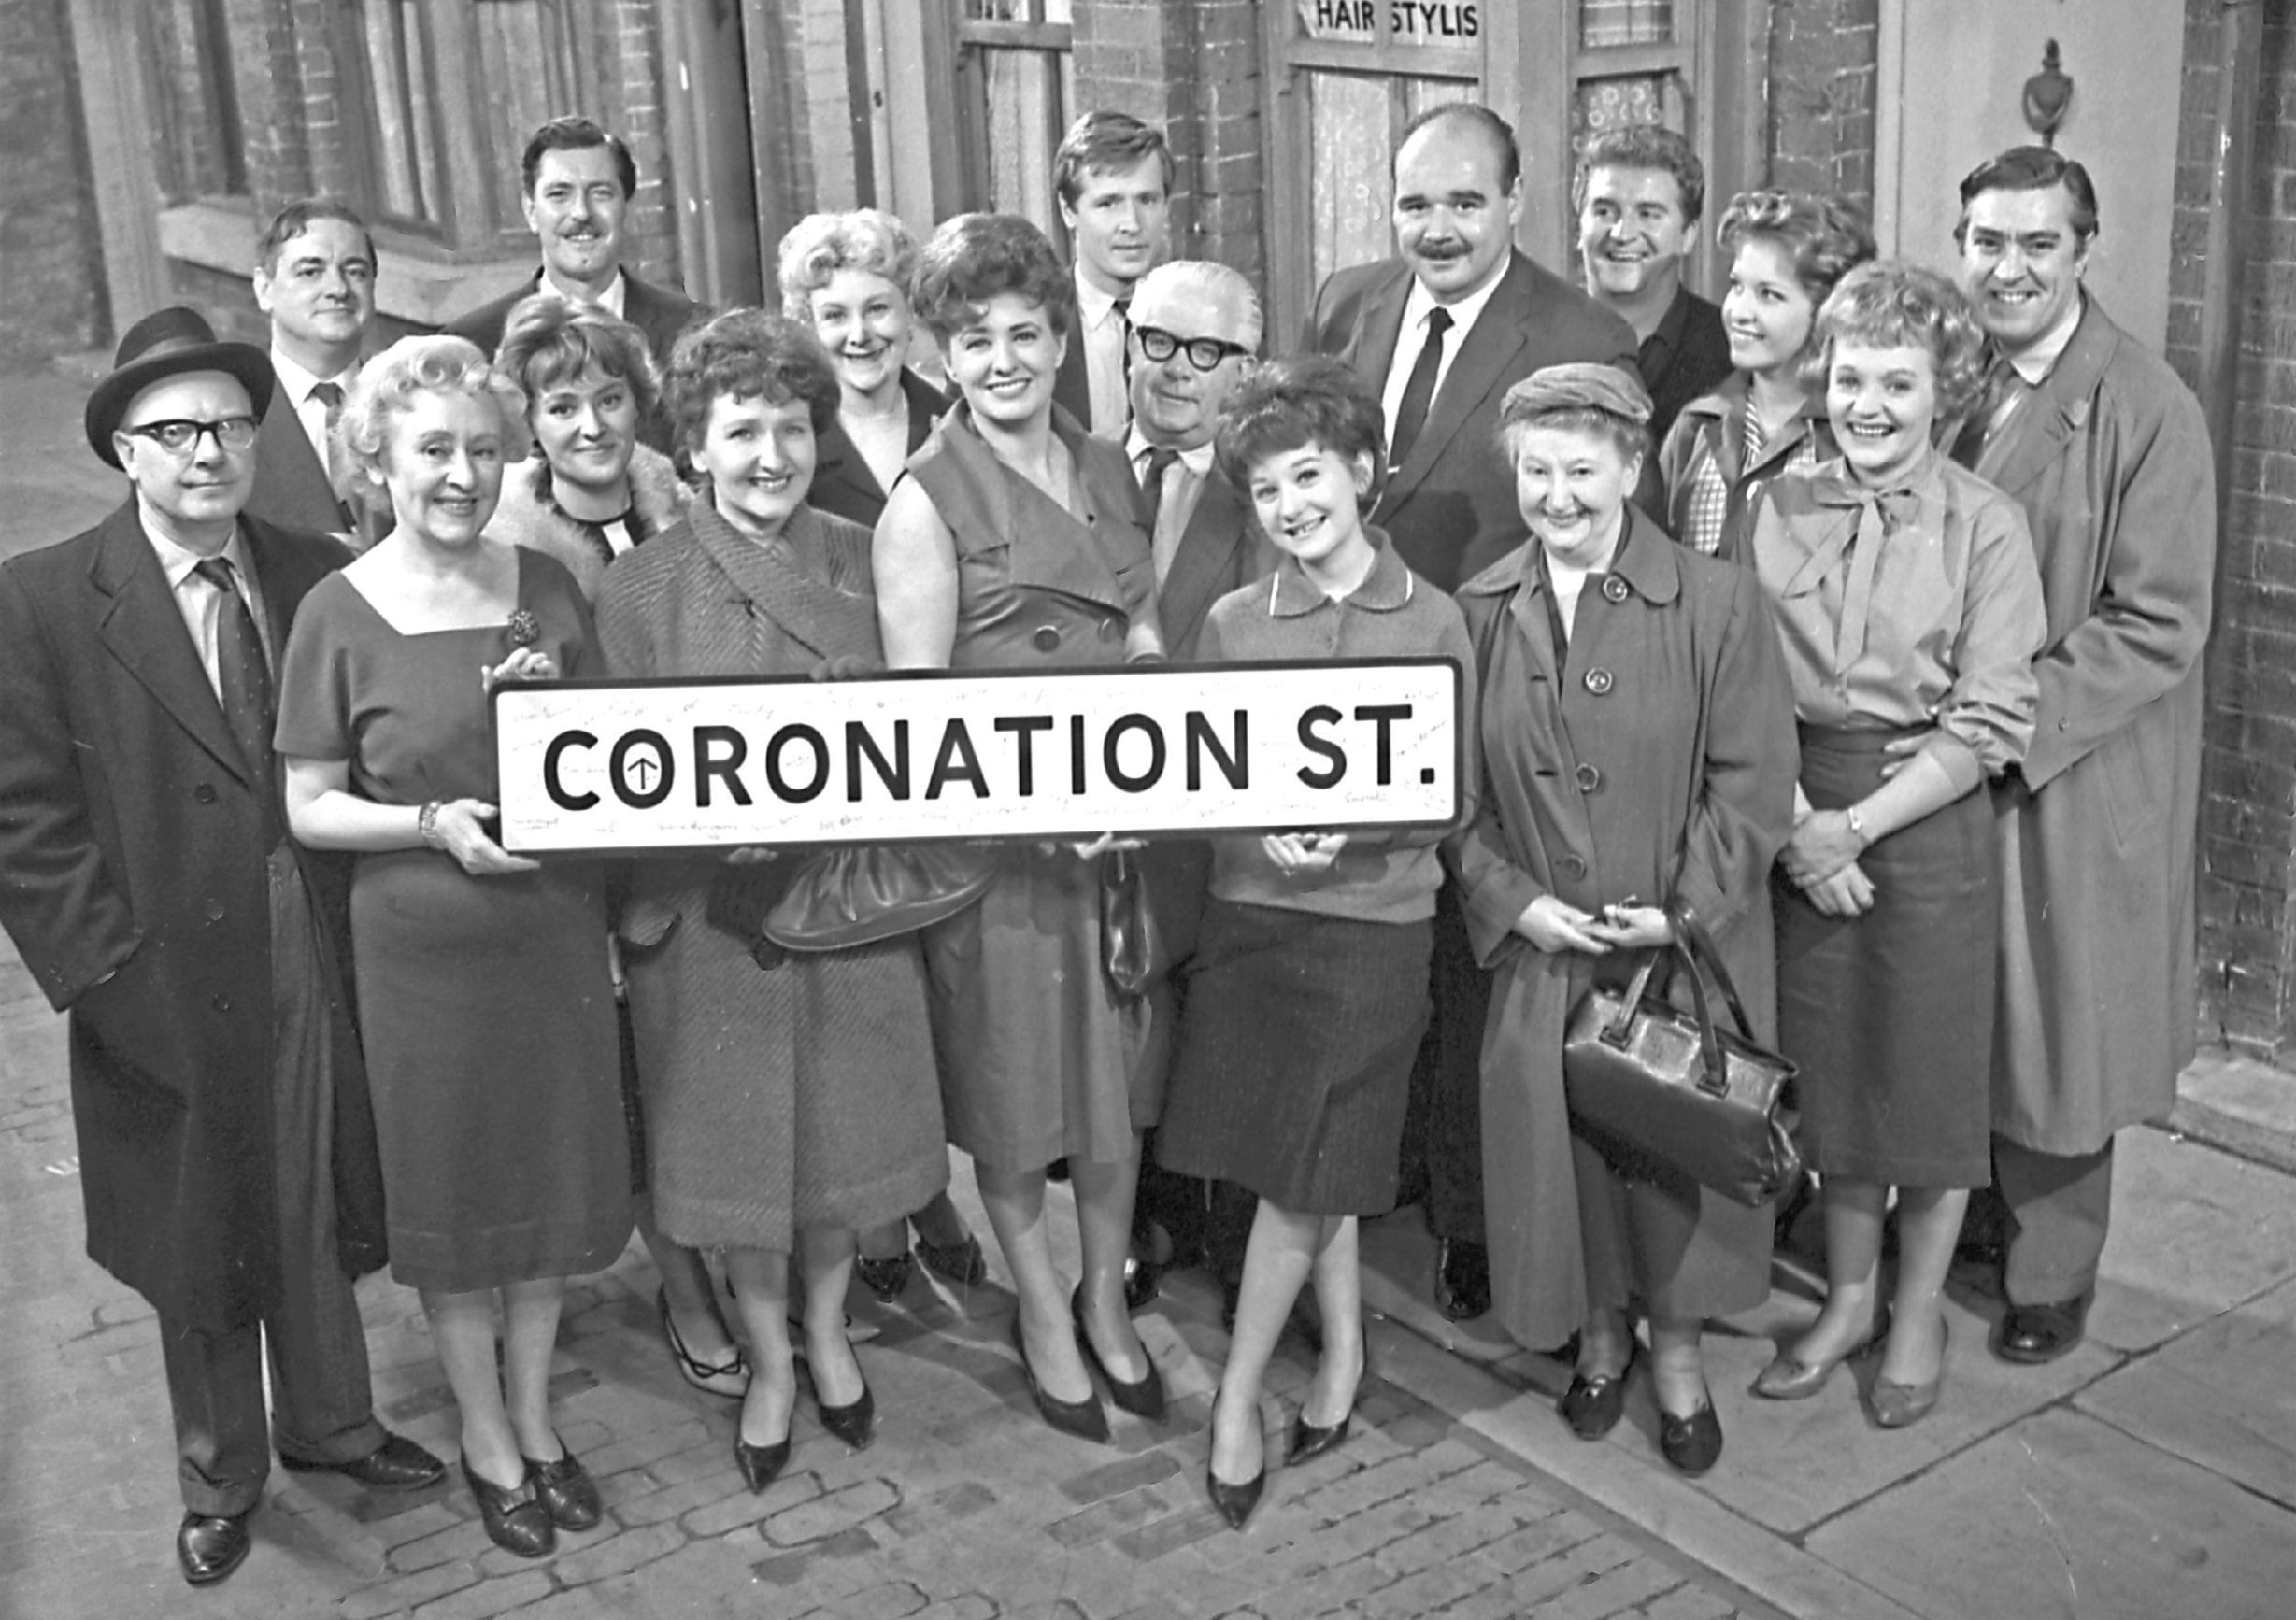 The cast of Coronation Street in 1963